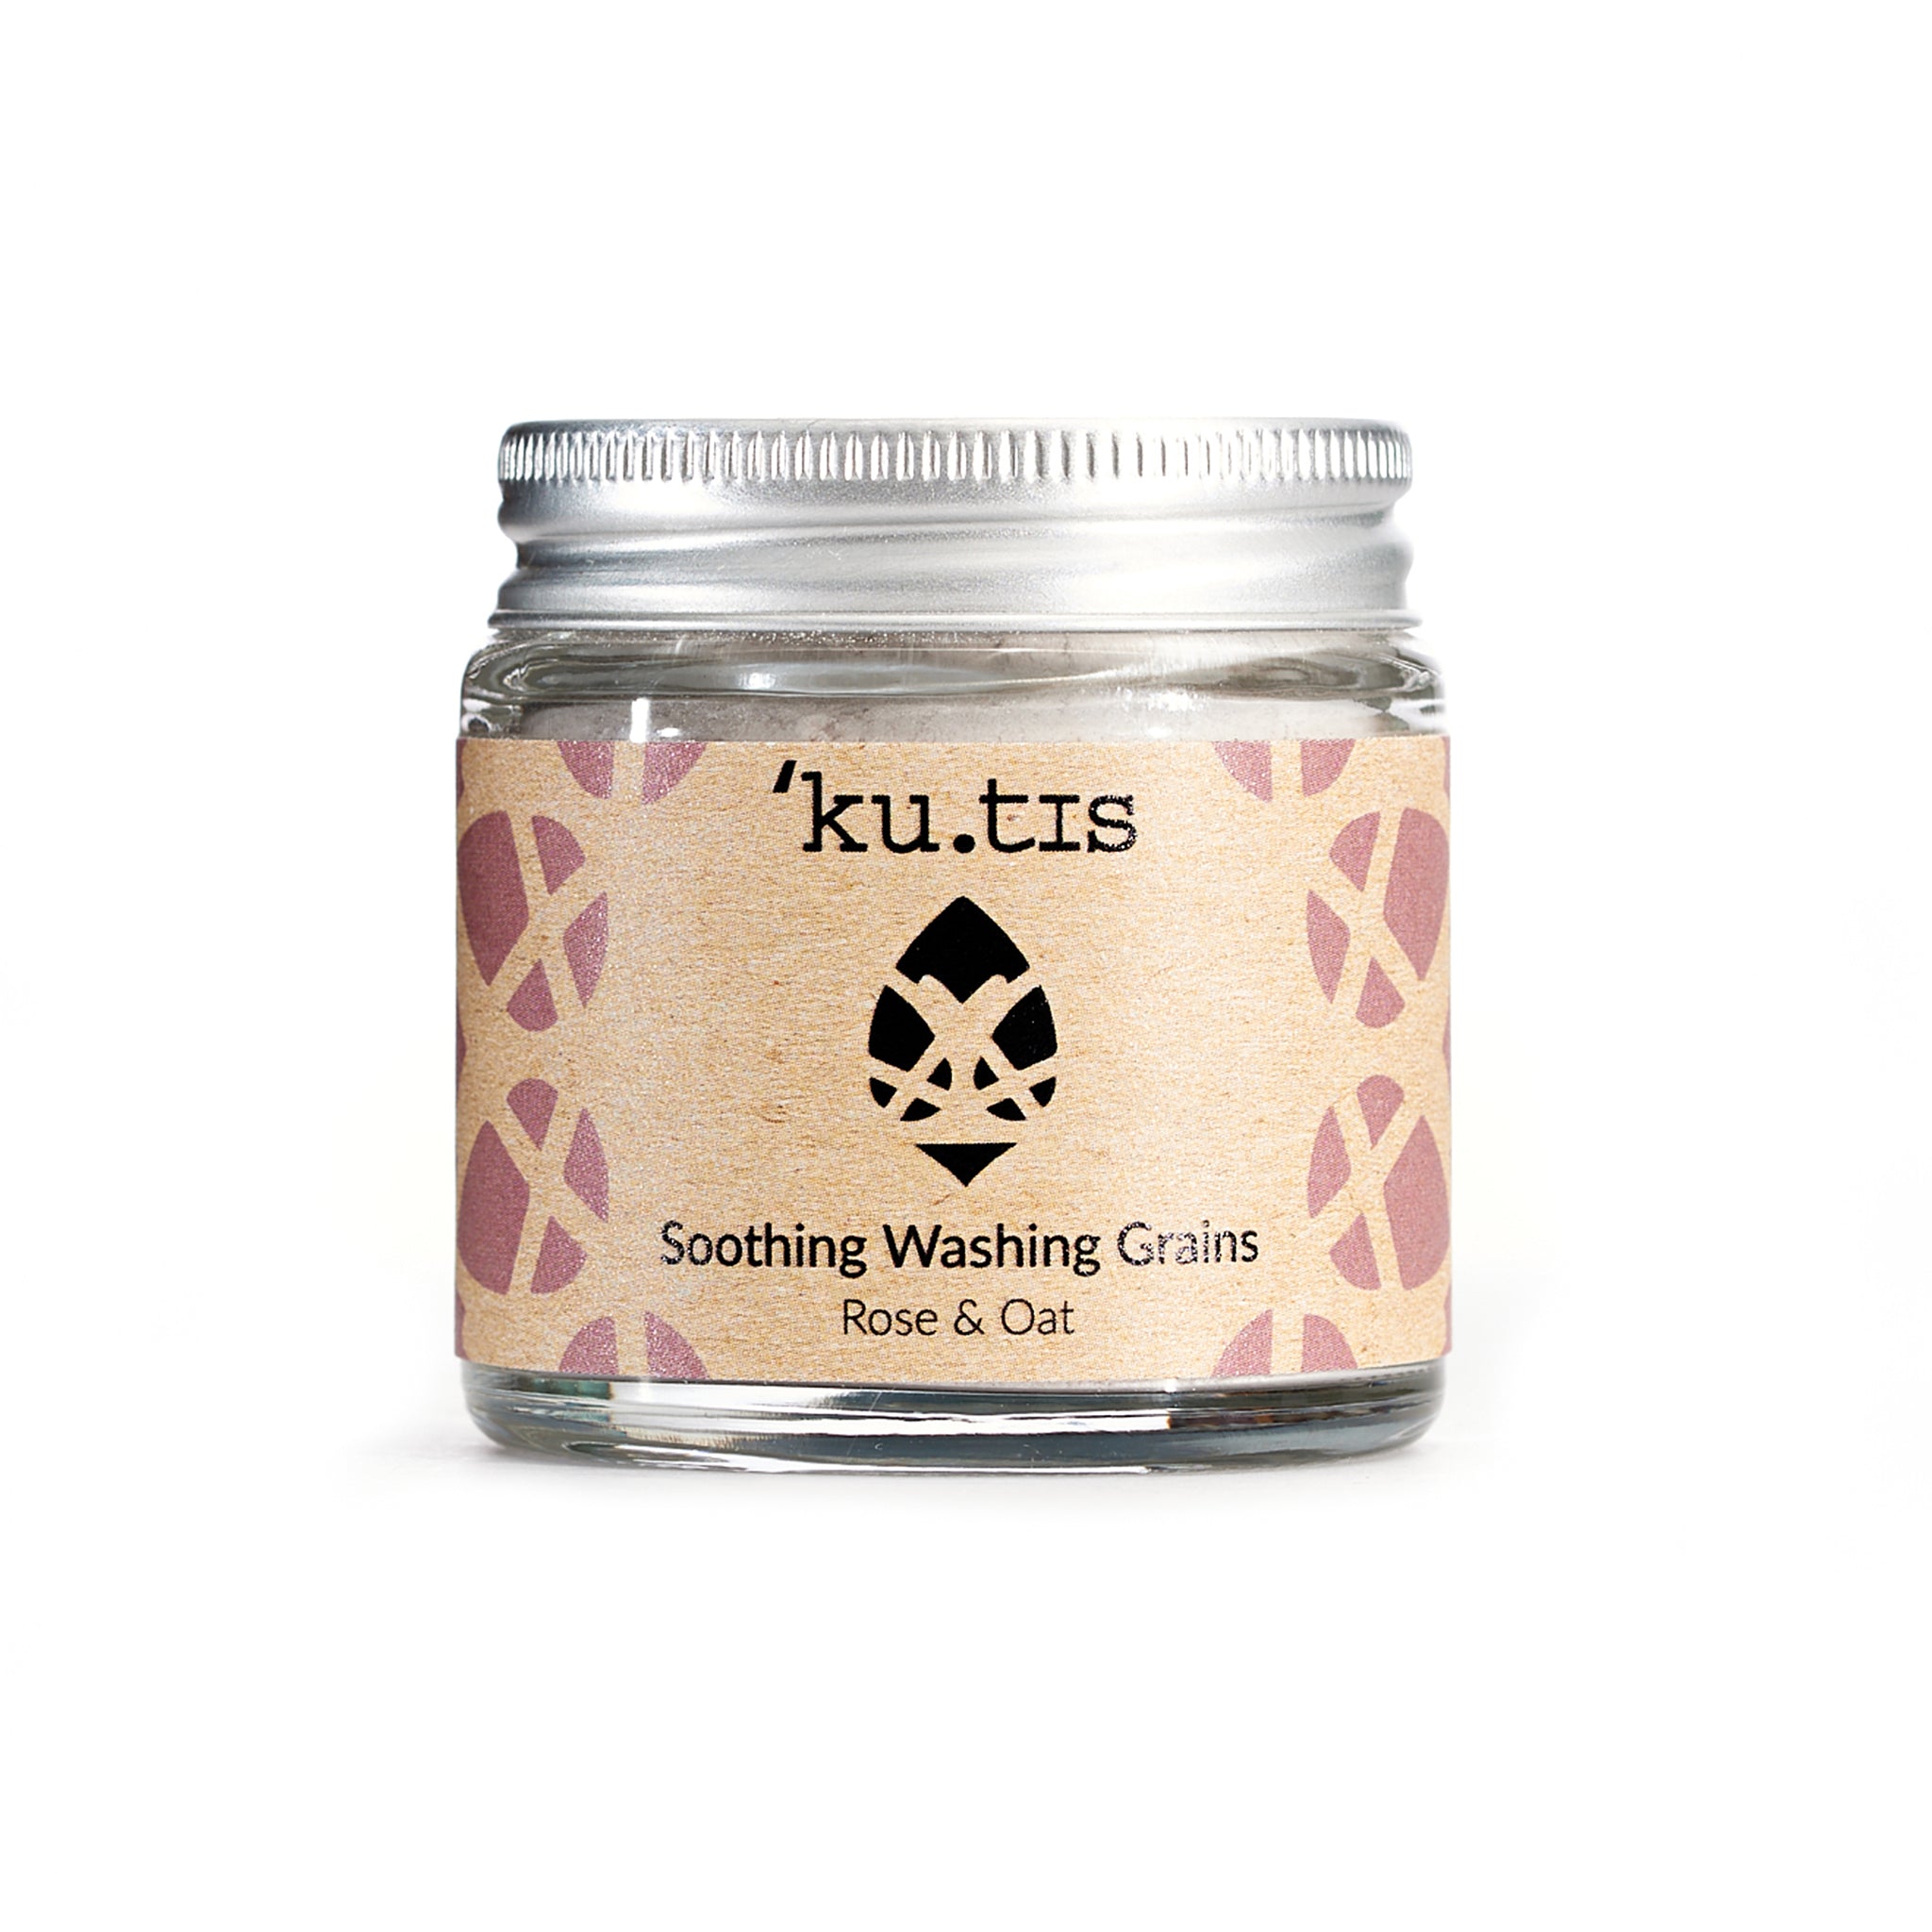 Natural soothing washing grains in powder form in a glass jar with an aluminium screw top silver lid.